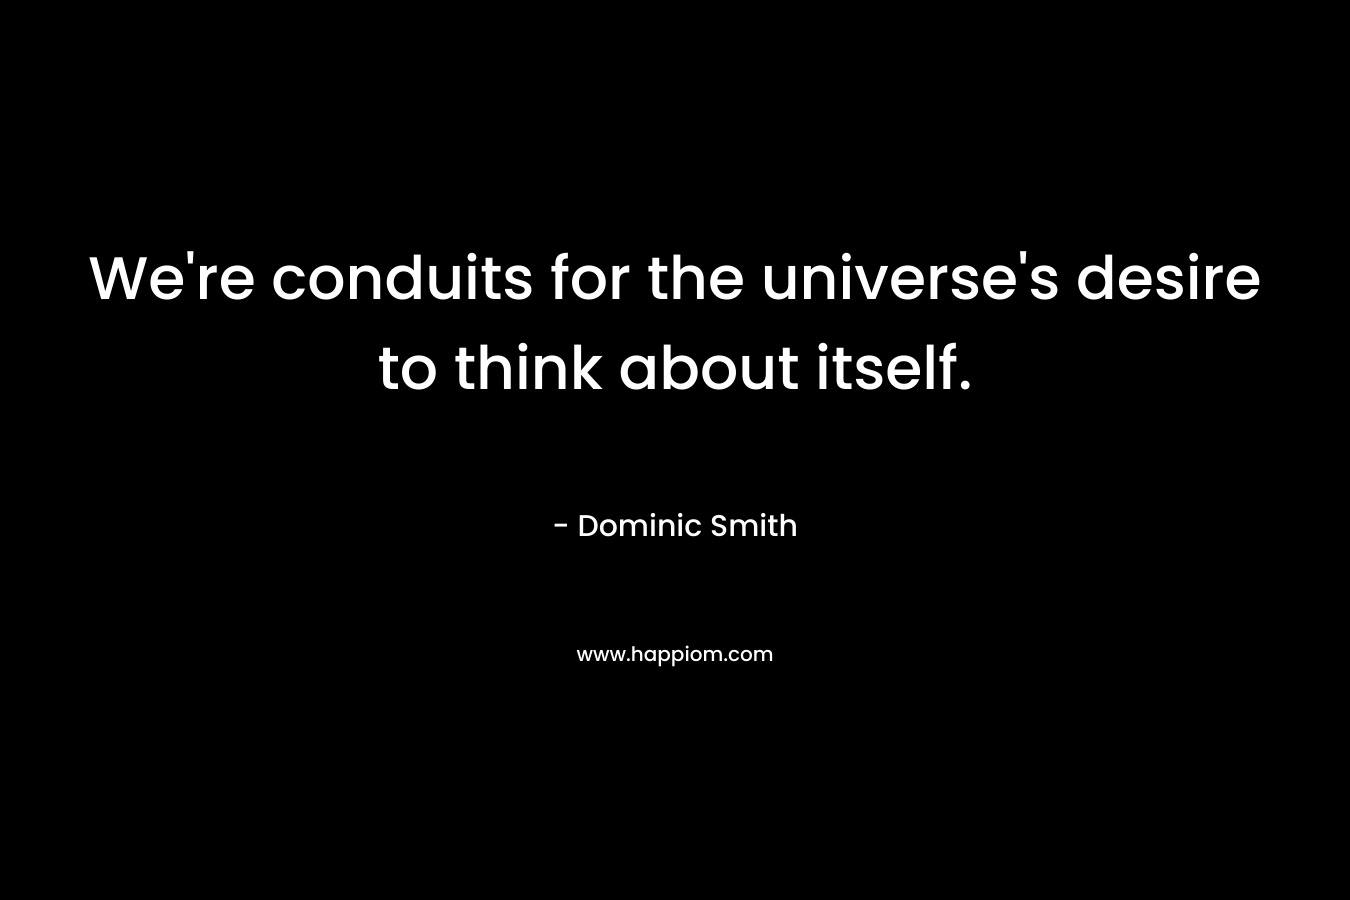 We’re conduits for the universe’s desire to think about itself. – Dominic Smith